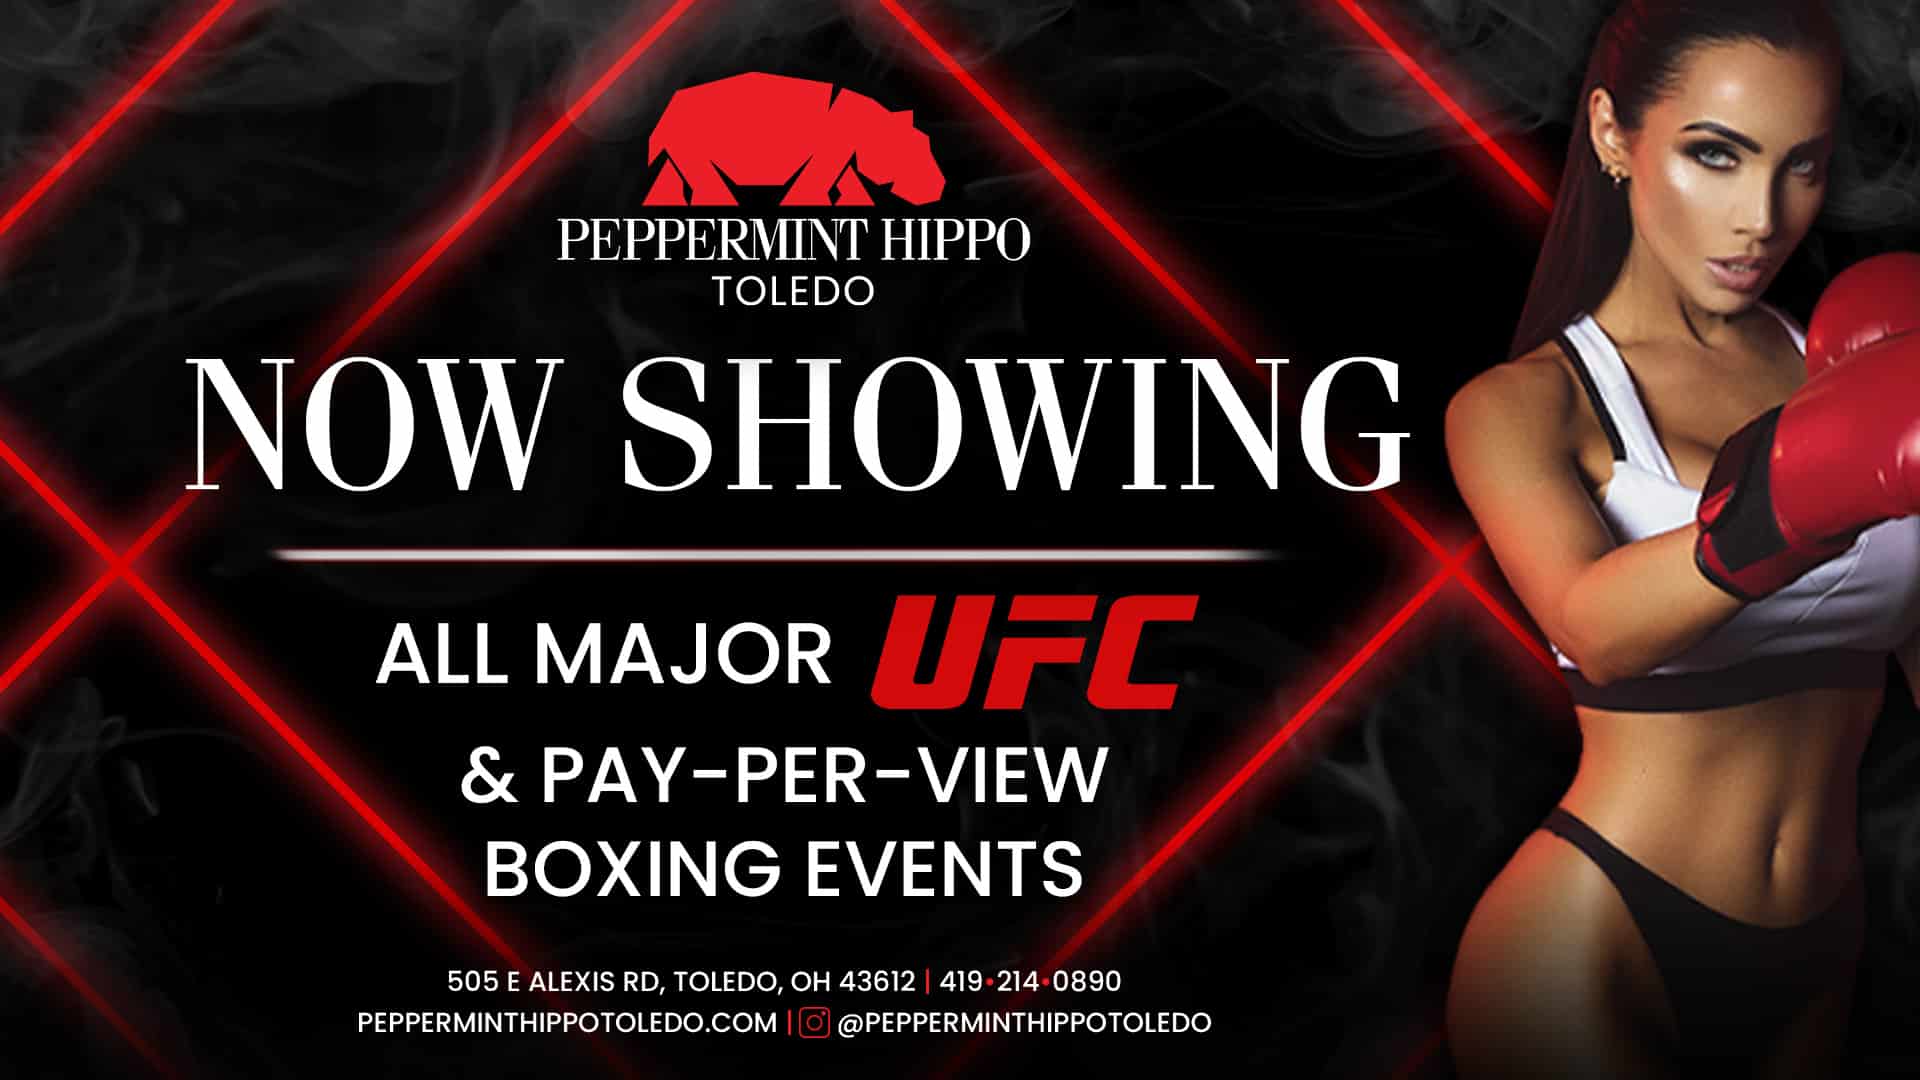 Now Showing All Major UFC at Peppermint Hippo Las Vegas